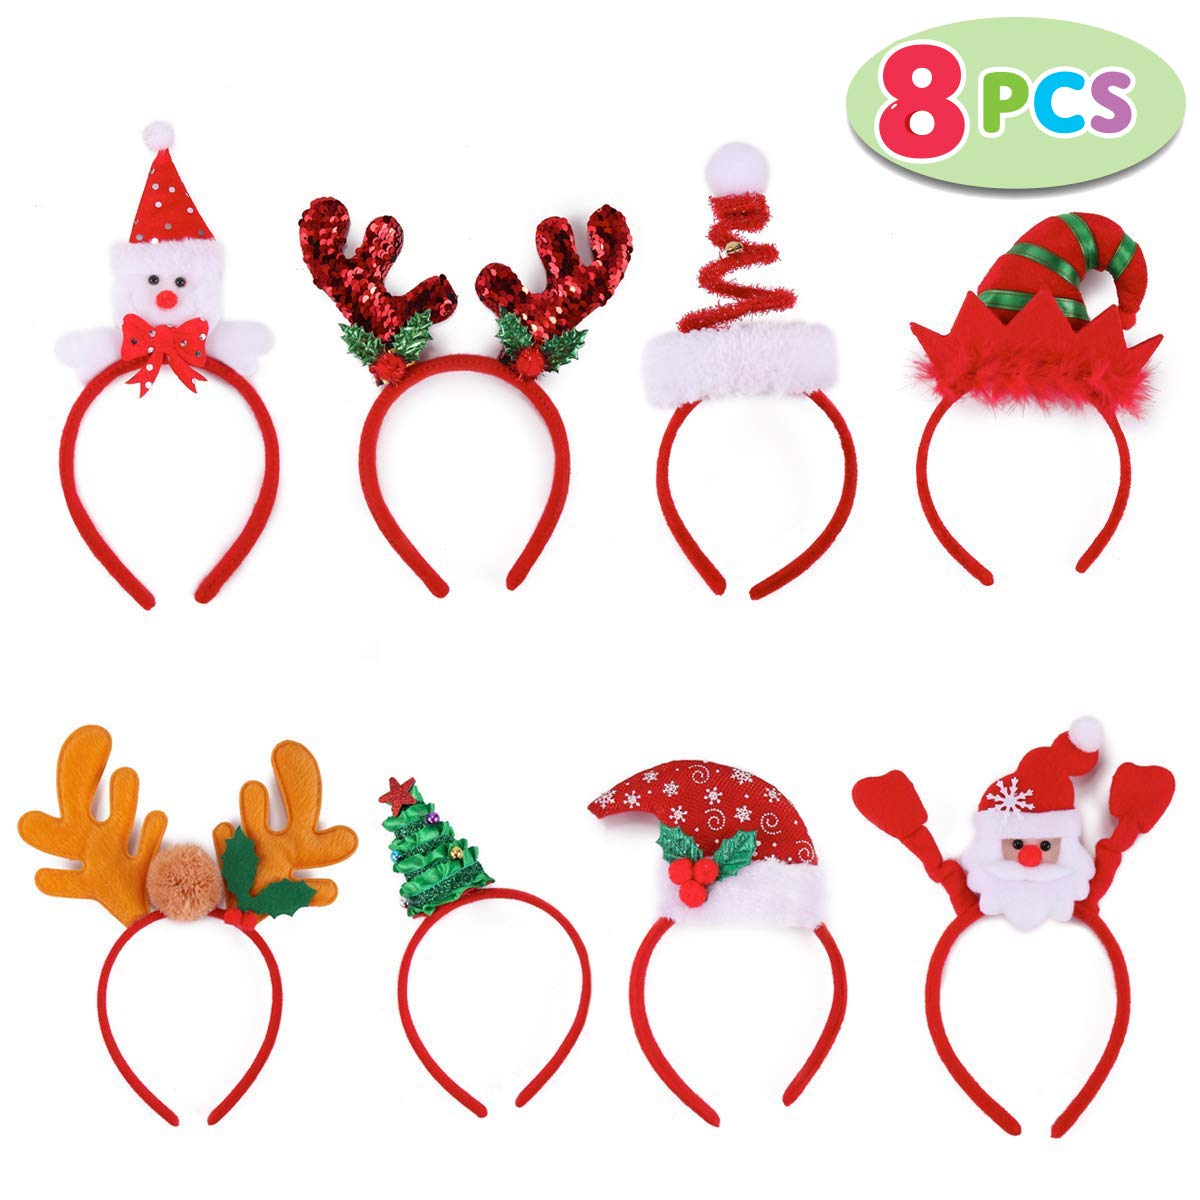 Pack of 8 Christmas Headbands with Different Designs for Christmas and Holiday Parties (ONE Size FIT ALLL) Red